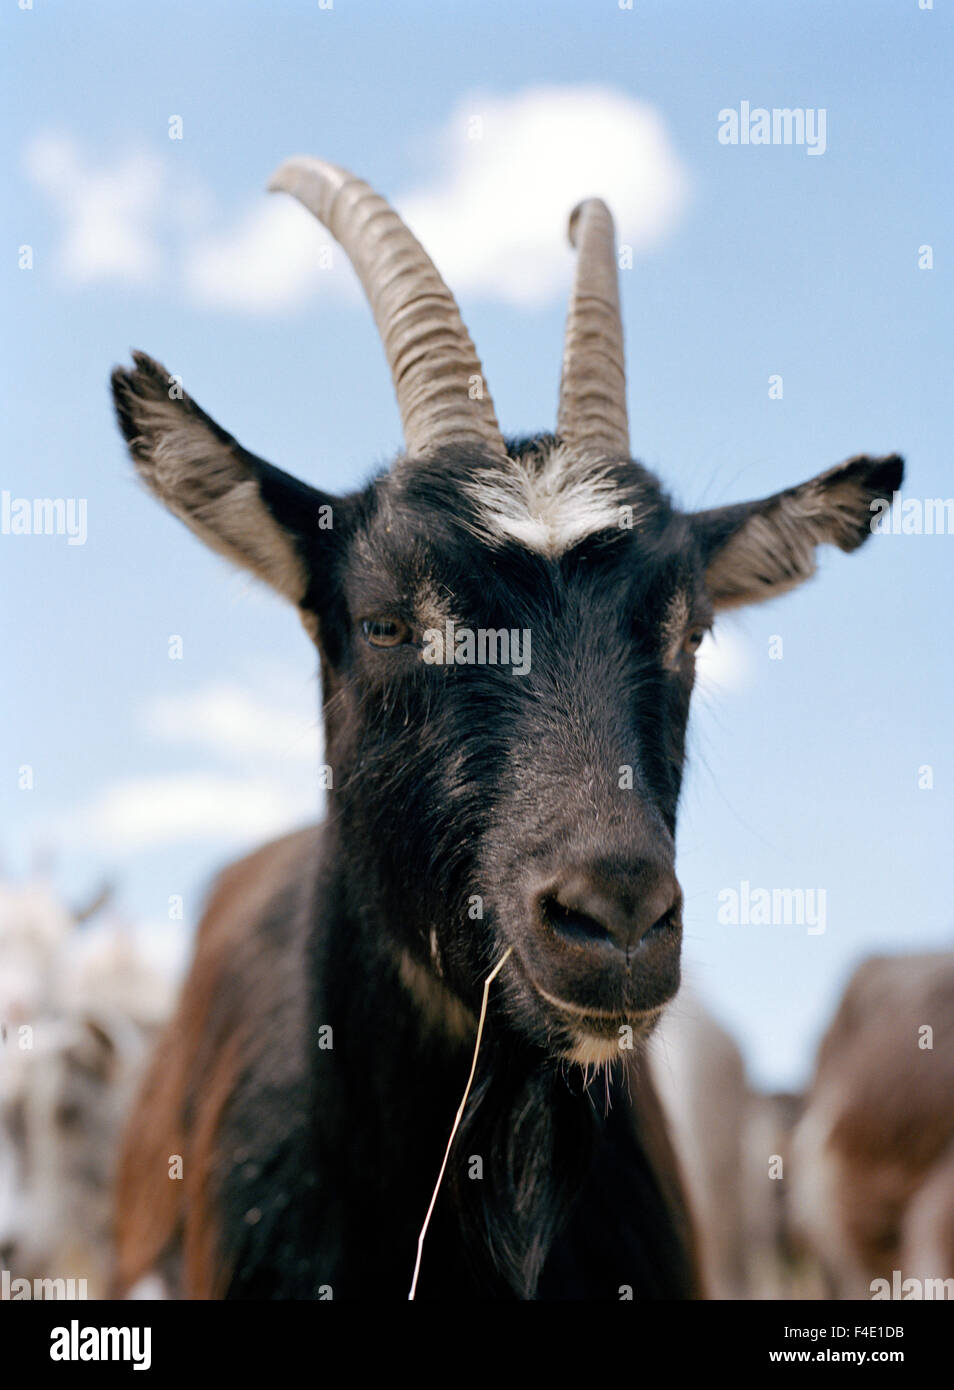 A goat, Sweden. Stock Photo